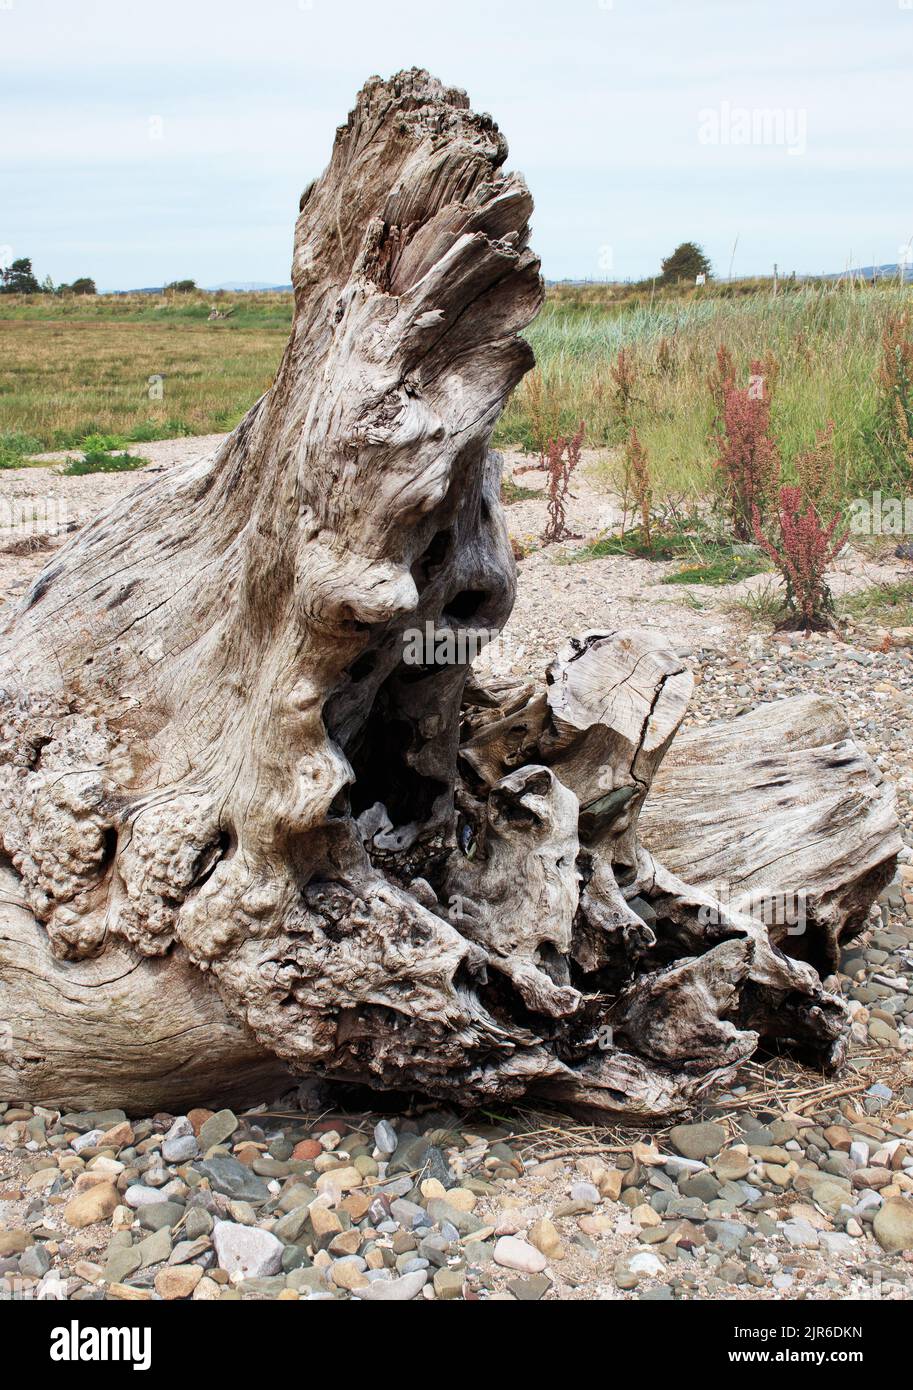 Driftwood with a sculpted appearance, in portrait format, suggesting life form Stock Photo